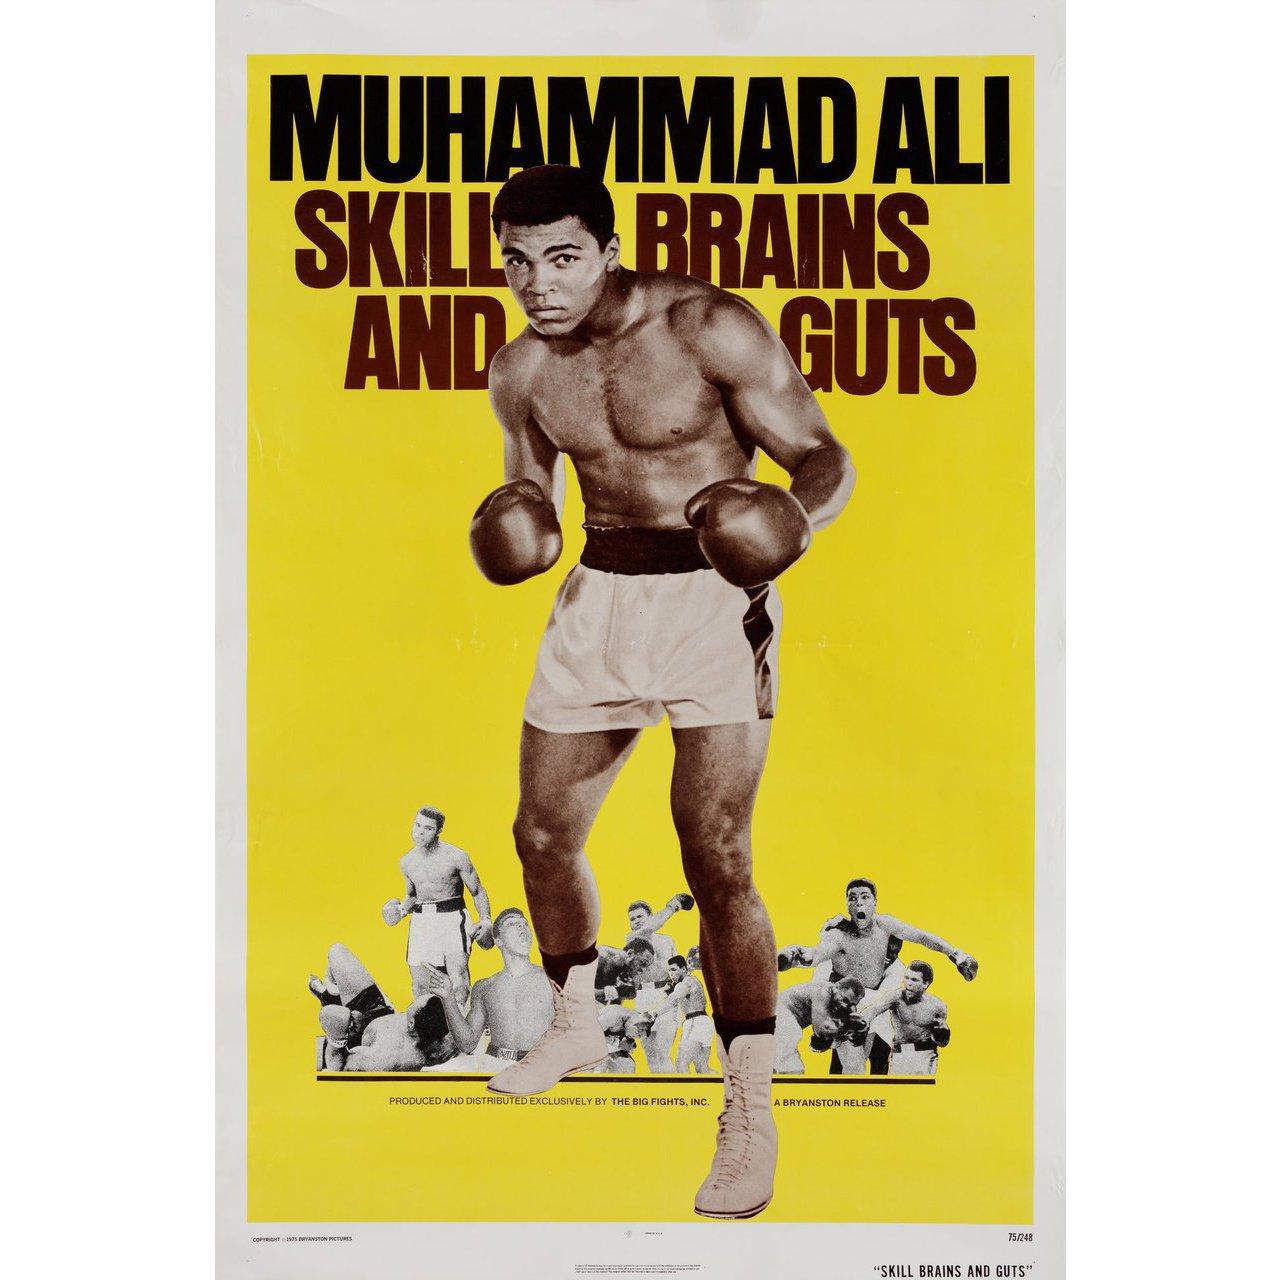 Original 1975 U.S. one sheet poster for the documentary film Muhammad Ali: Skill Brains and Guts with Muhammad Ali. Very Good condition, rolled with small creases. Please note: the size is stated in inches and the actual size can vary by an inch or